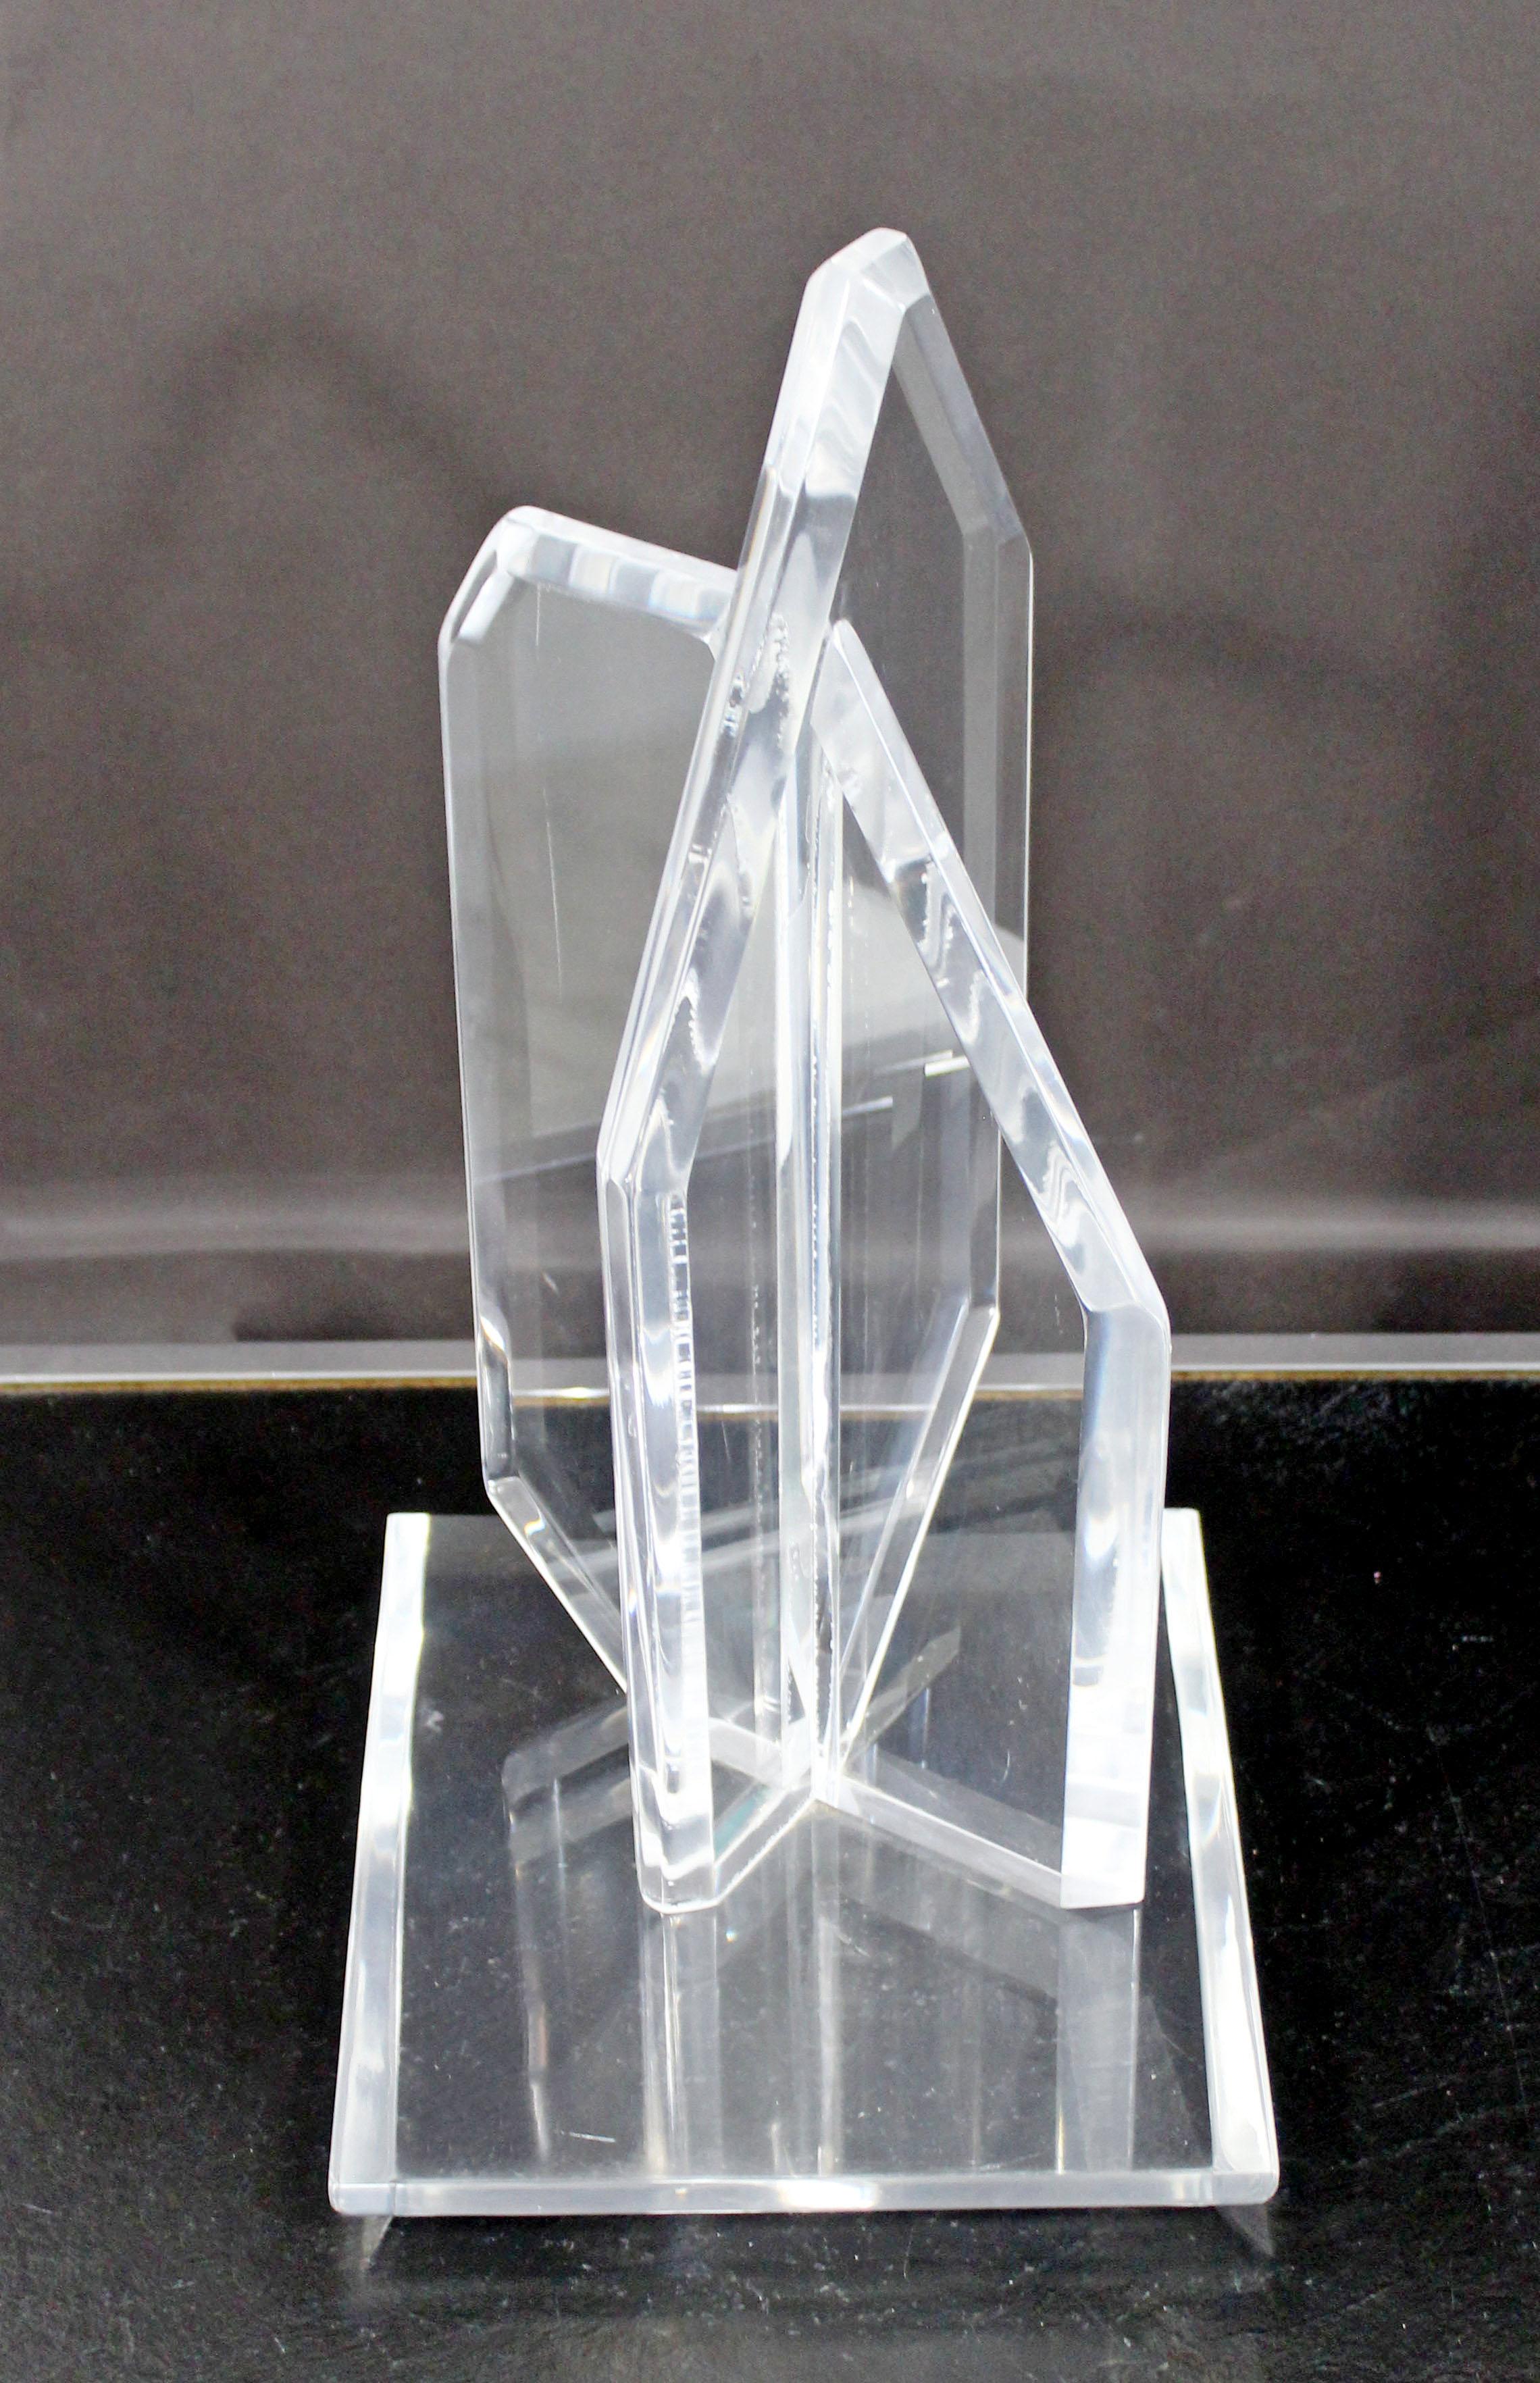 For your consideration is a wonderful, abstract table sculpture, made of clear Lucite, circa the 1970s. In very good condition, except for a mark in one of the corners. The dimensions are 9